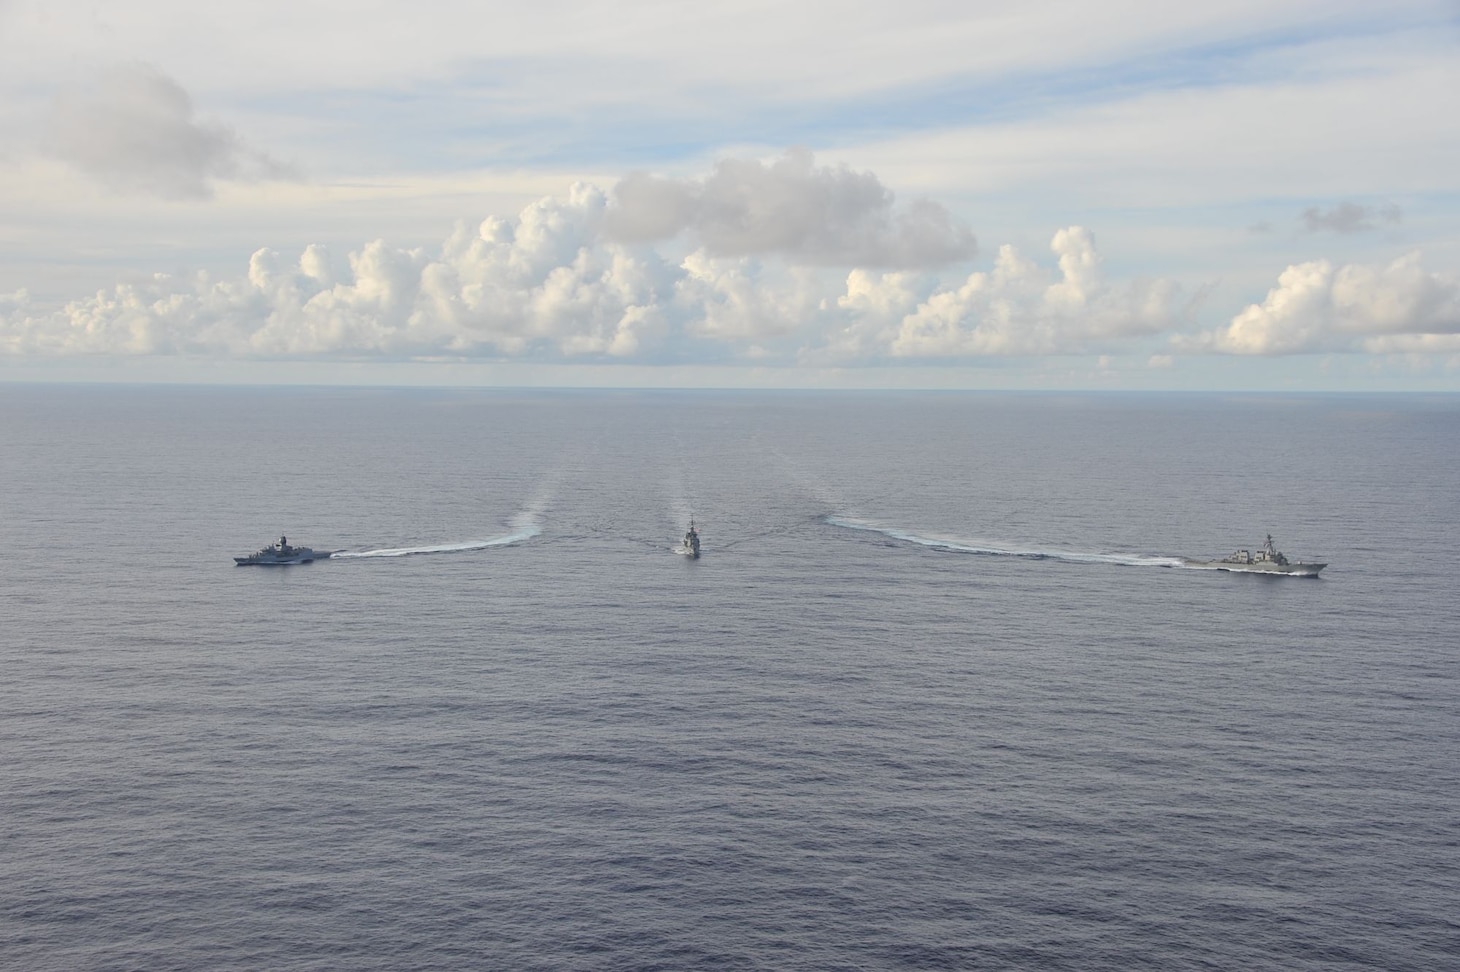 SOUTH CHINA SEA (Oct. 20, 2020) - The Arleigh Burke-class guided-missile destroyer USS John S. McCain (DDG 56) (right), Japanese Maritime Self-Defense Force (JMSDF) ship JS Kirisame (DD 104) (middle), and Royal Australian Navy ship HMAS Arunta (FFH 151) (left) sail together in the South China Sea during multinational exercises. These exercises marked the fifth time of 2020 that Australia, Japan, and the U.S. have conducted operations together in the 7th Fleet area of operations